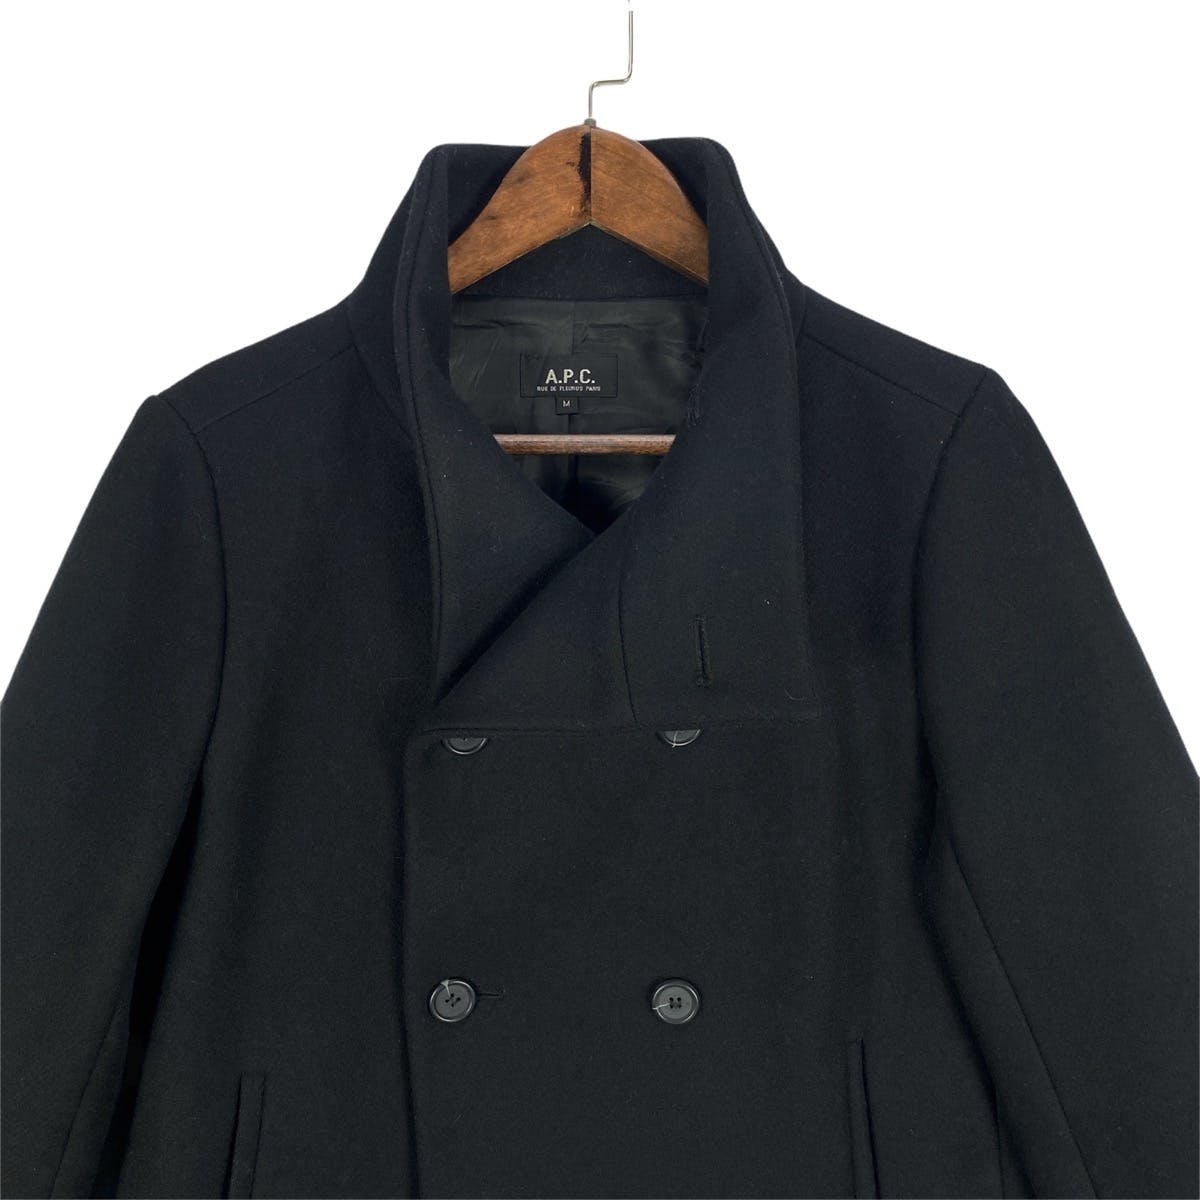 A.P.C Peacoat Wool Cropped Jacket Made In Poland - 3